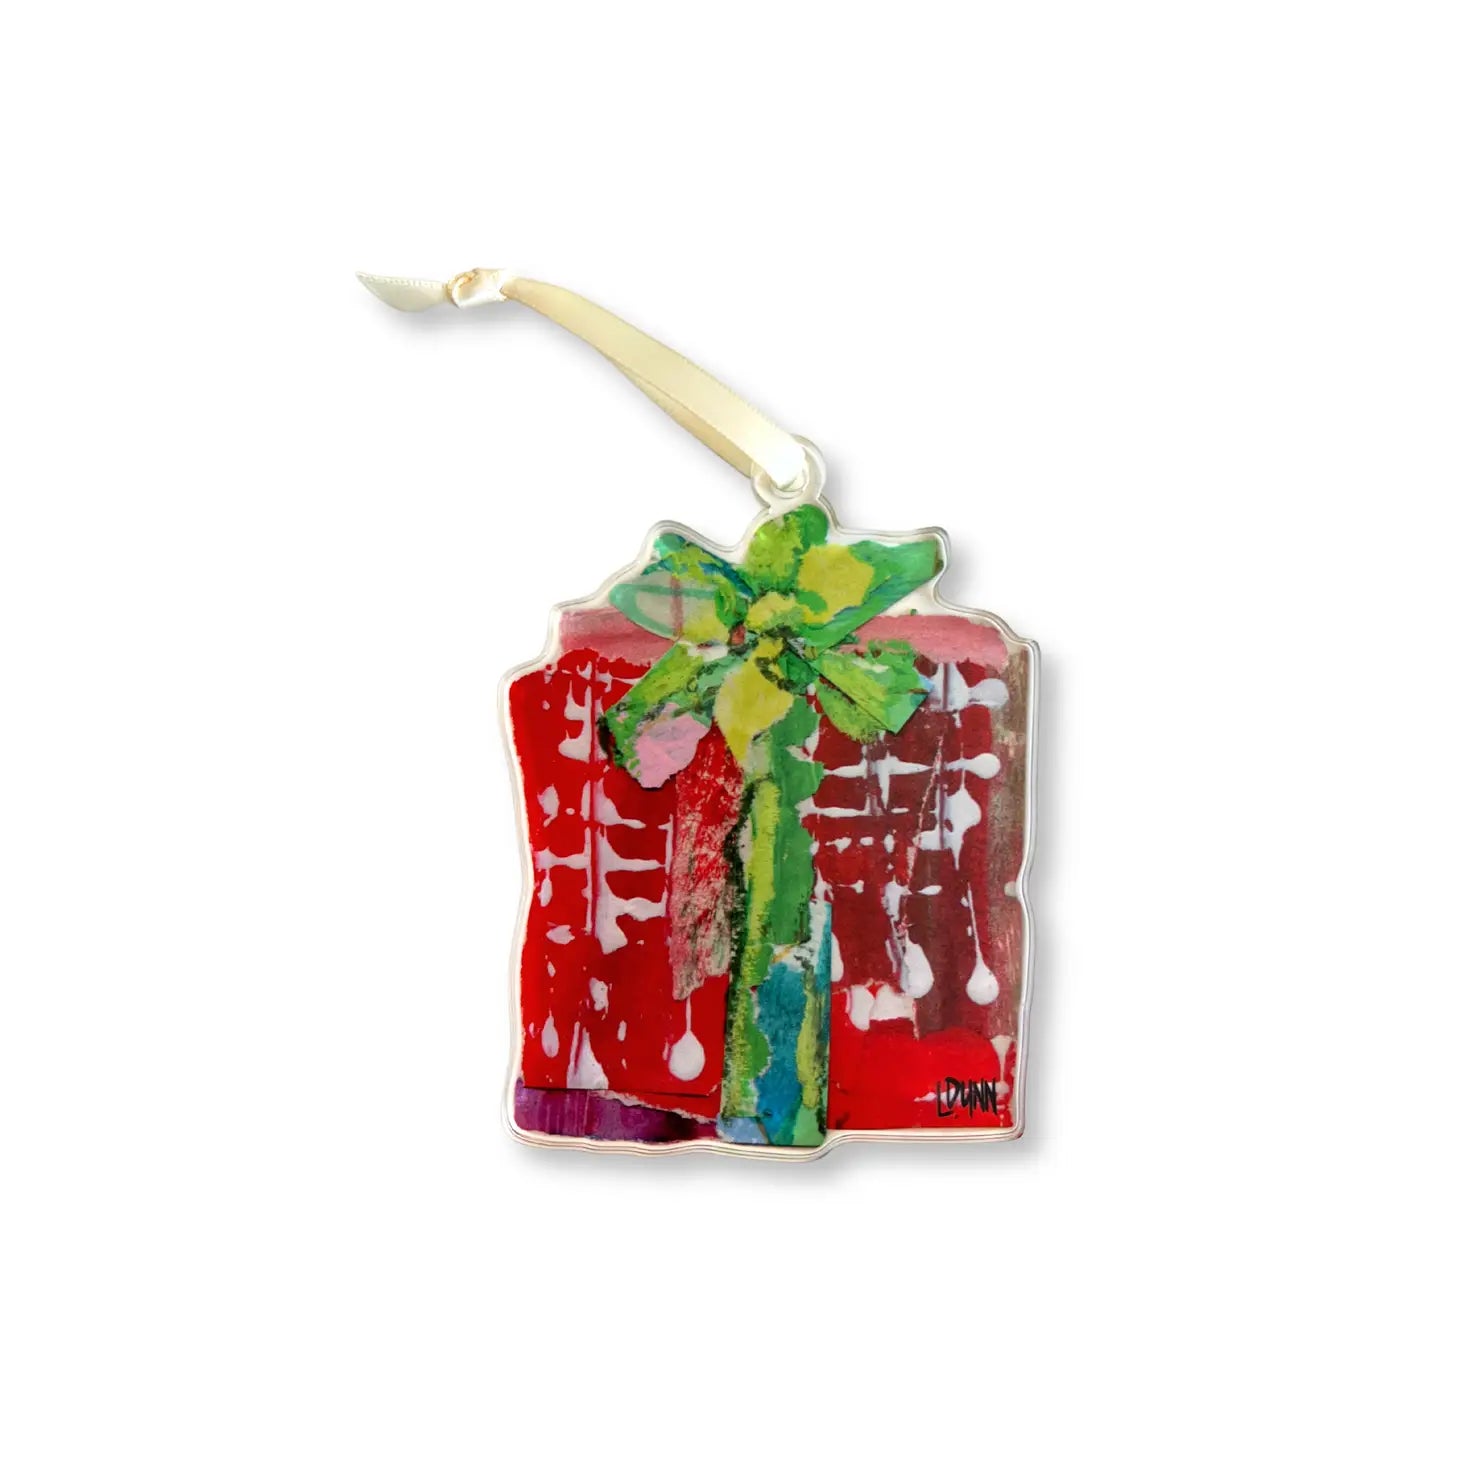 Gifts of Love Acrylic Ornament Collection | Lauren Dunn